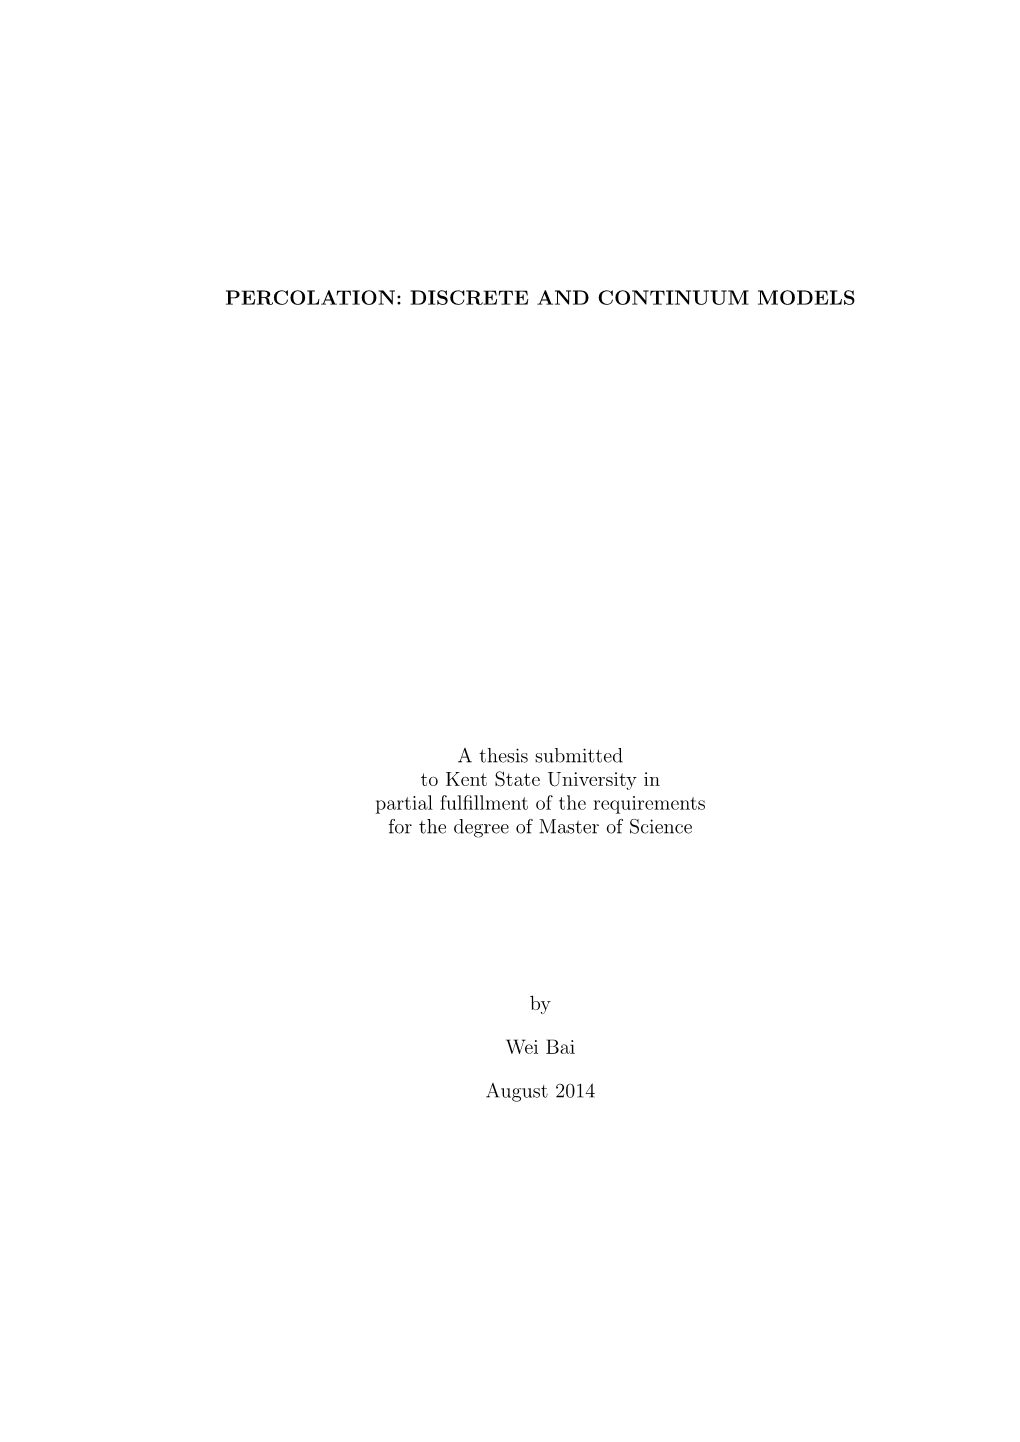 PERCOLATION: DISCRETE and CONTINUUM MODELS a Thesis Submitted to Kent State University in Partial Fulfillment of the Requirement